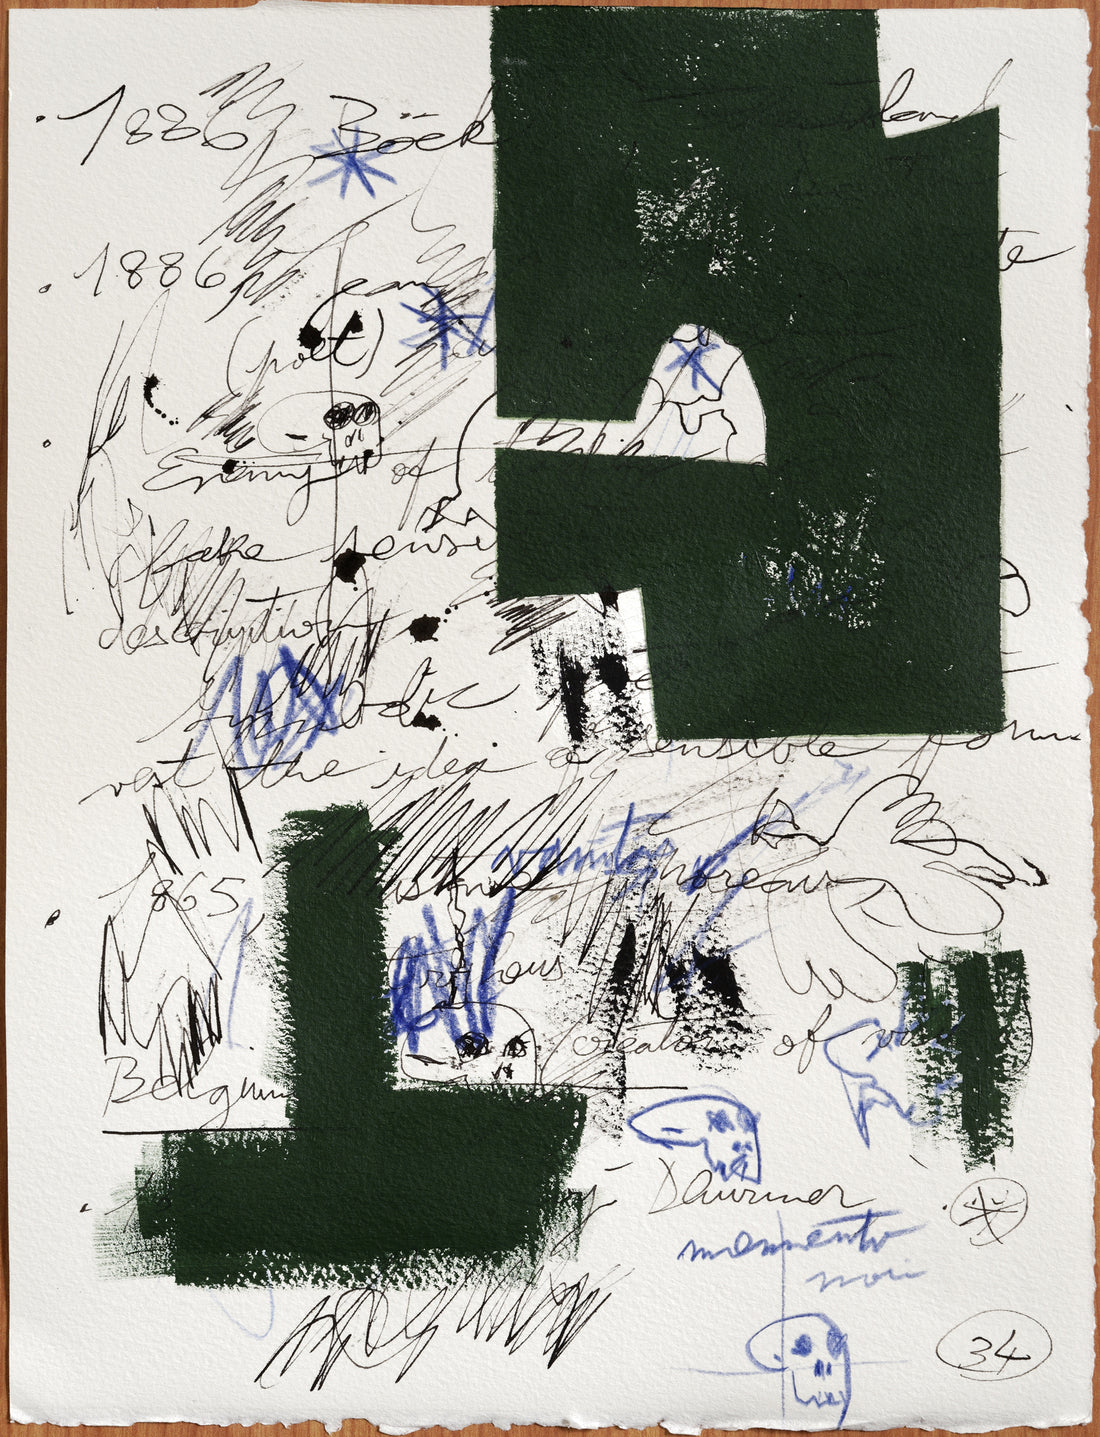 Parisi339-“Notes papier N.2” 2019 – 33,5 x 25cm – Mixed media on paper(sold)